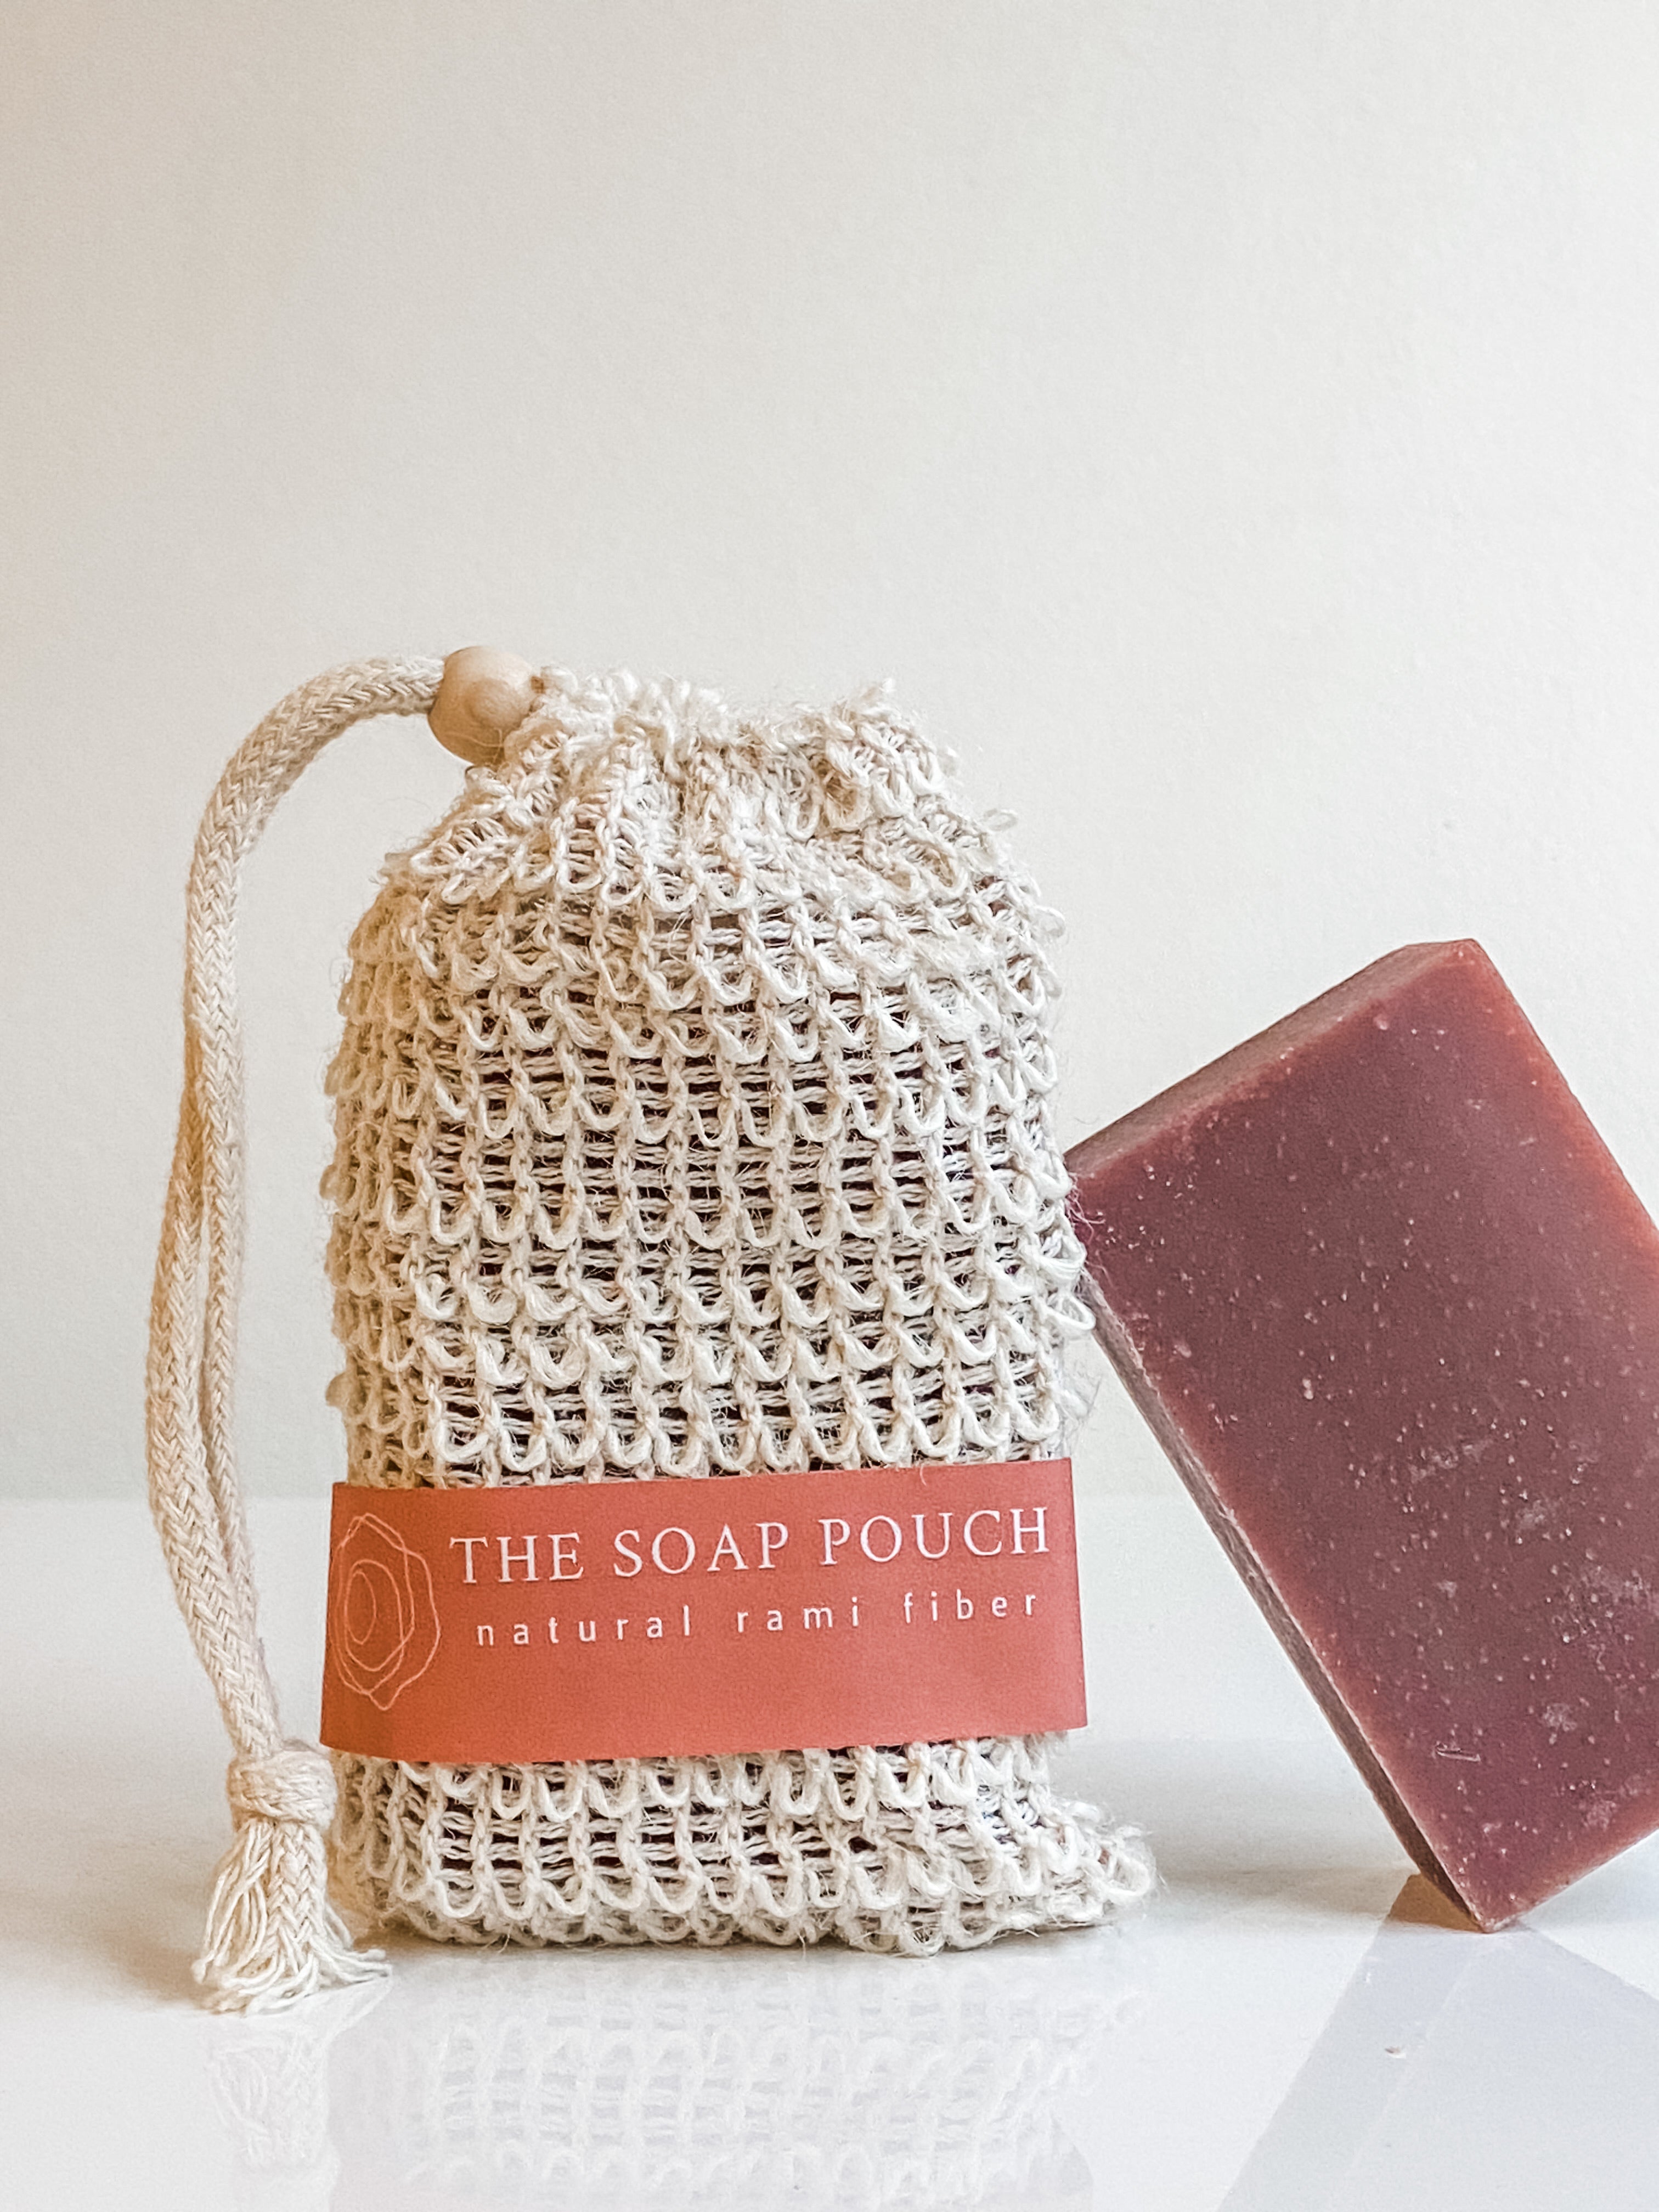 Natural Rami Soap Pouch of the Hidden Forest - Handmade with Natural Ingredients. Hidden Forest Naturals